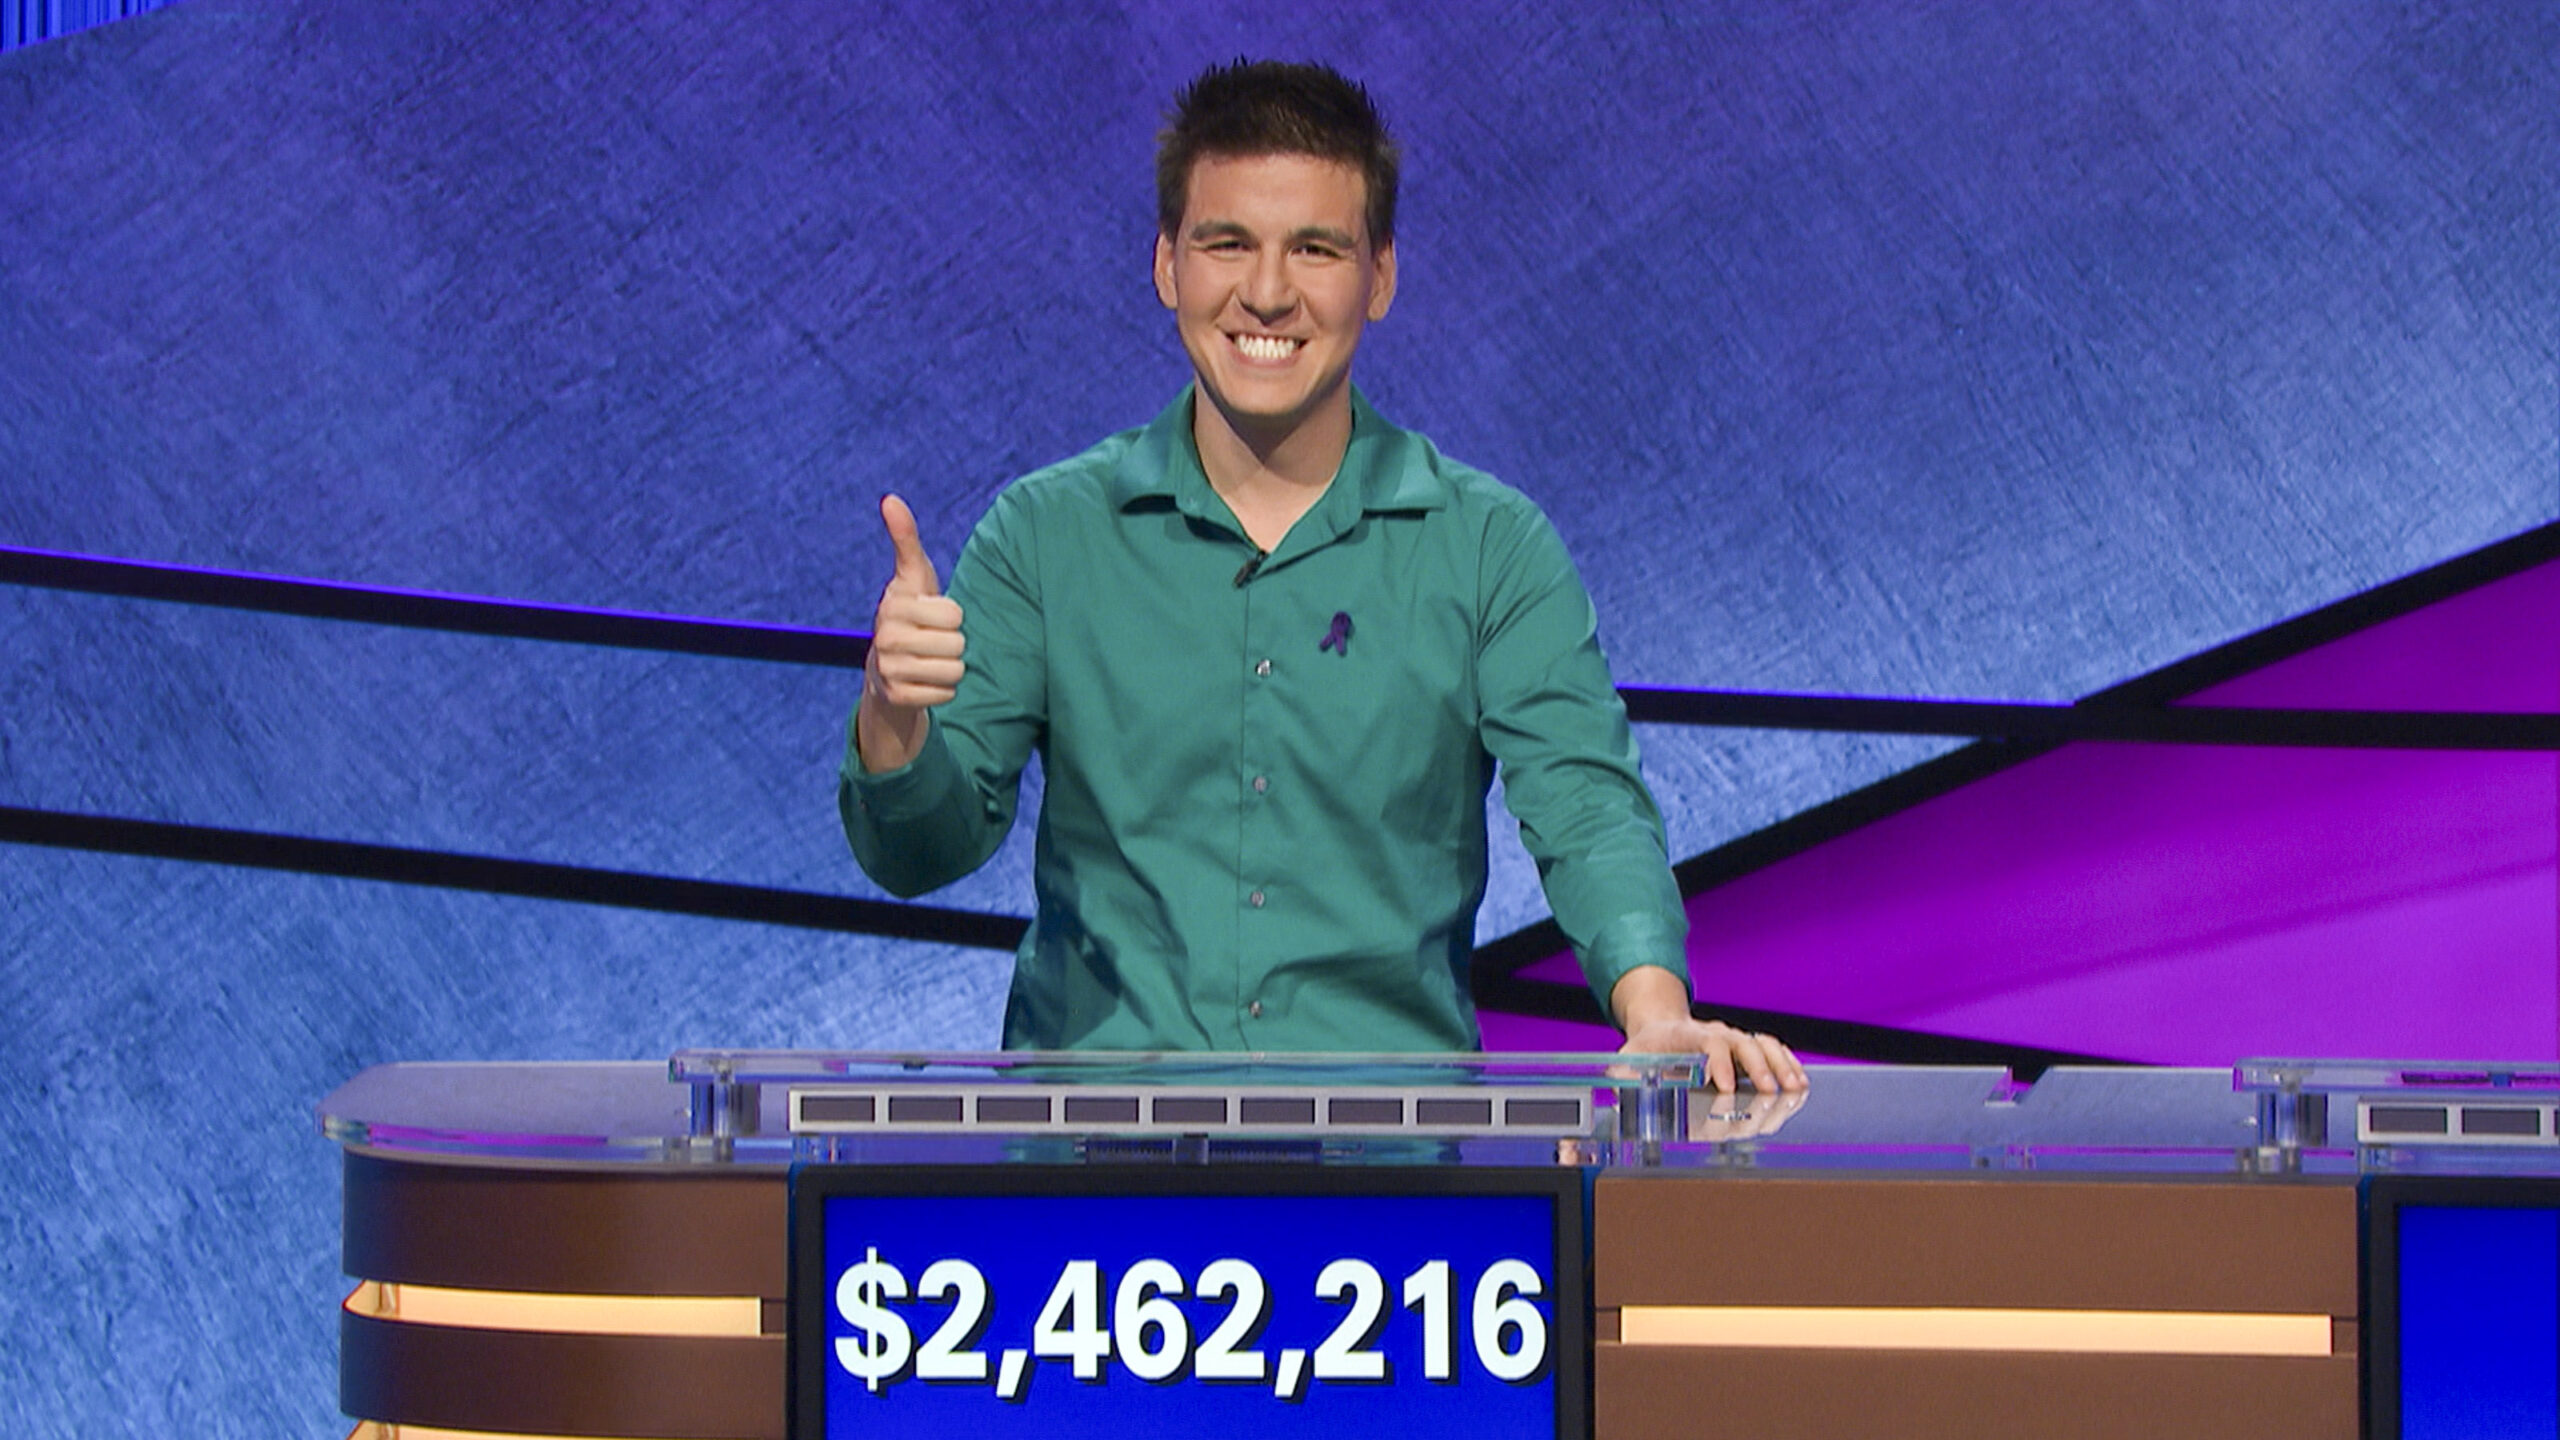 Jeopardy! Champ James Holzhauer Teams Up with Partypoker